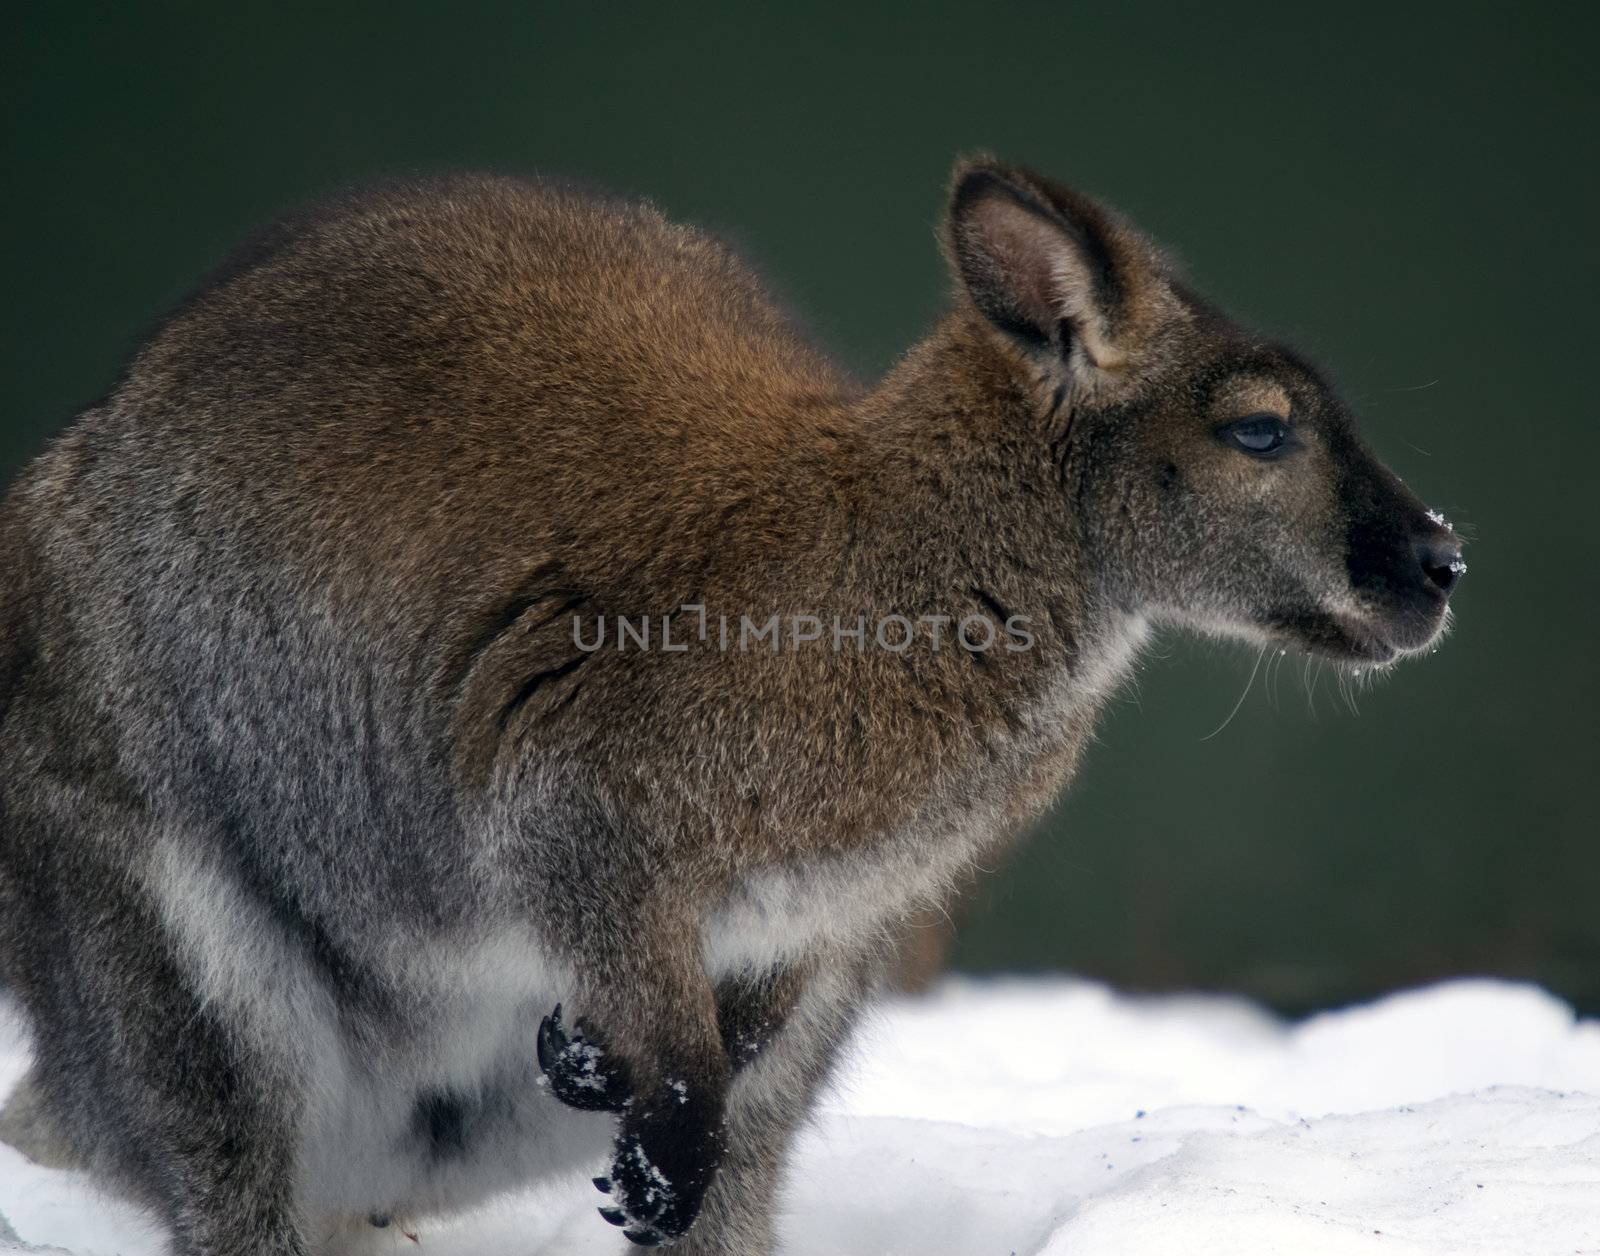 Picture of a Kangaroo in a snowy environment